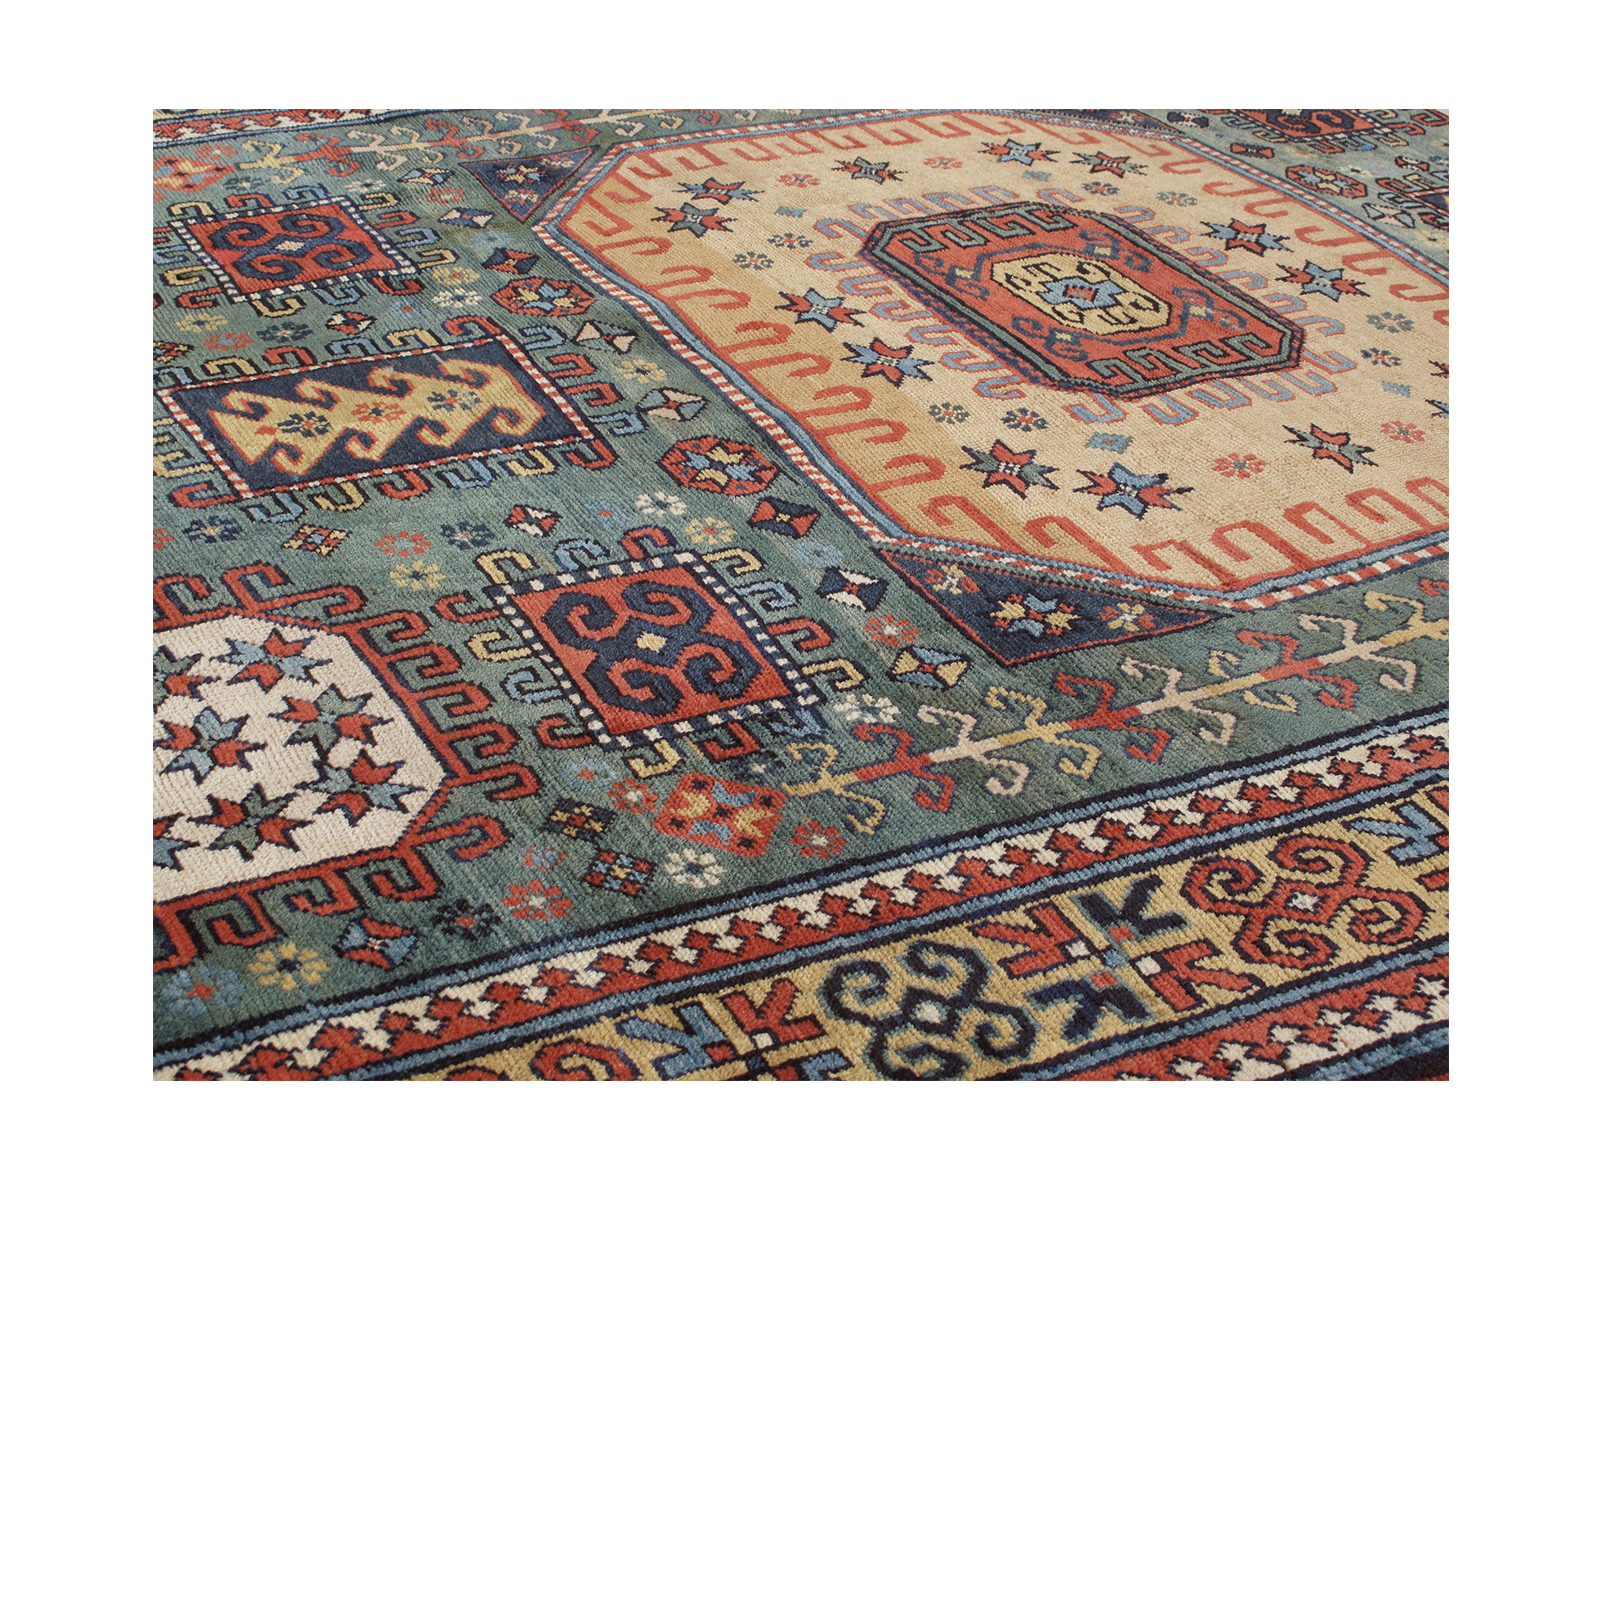 This Kazak rug is constructed of 100% handspun wool and natural dyes. 